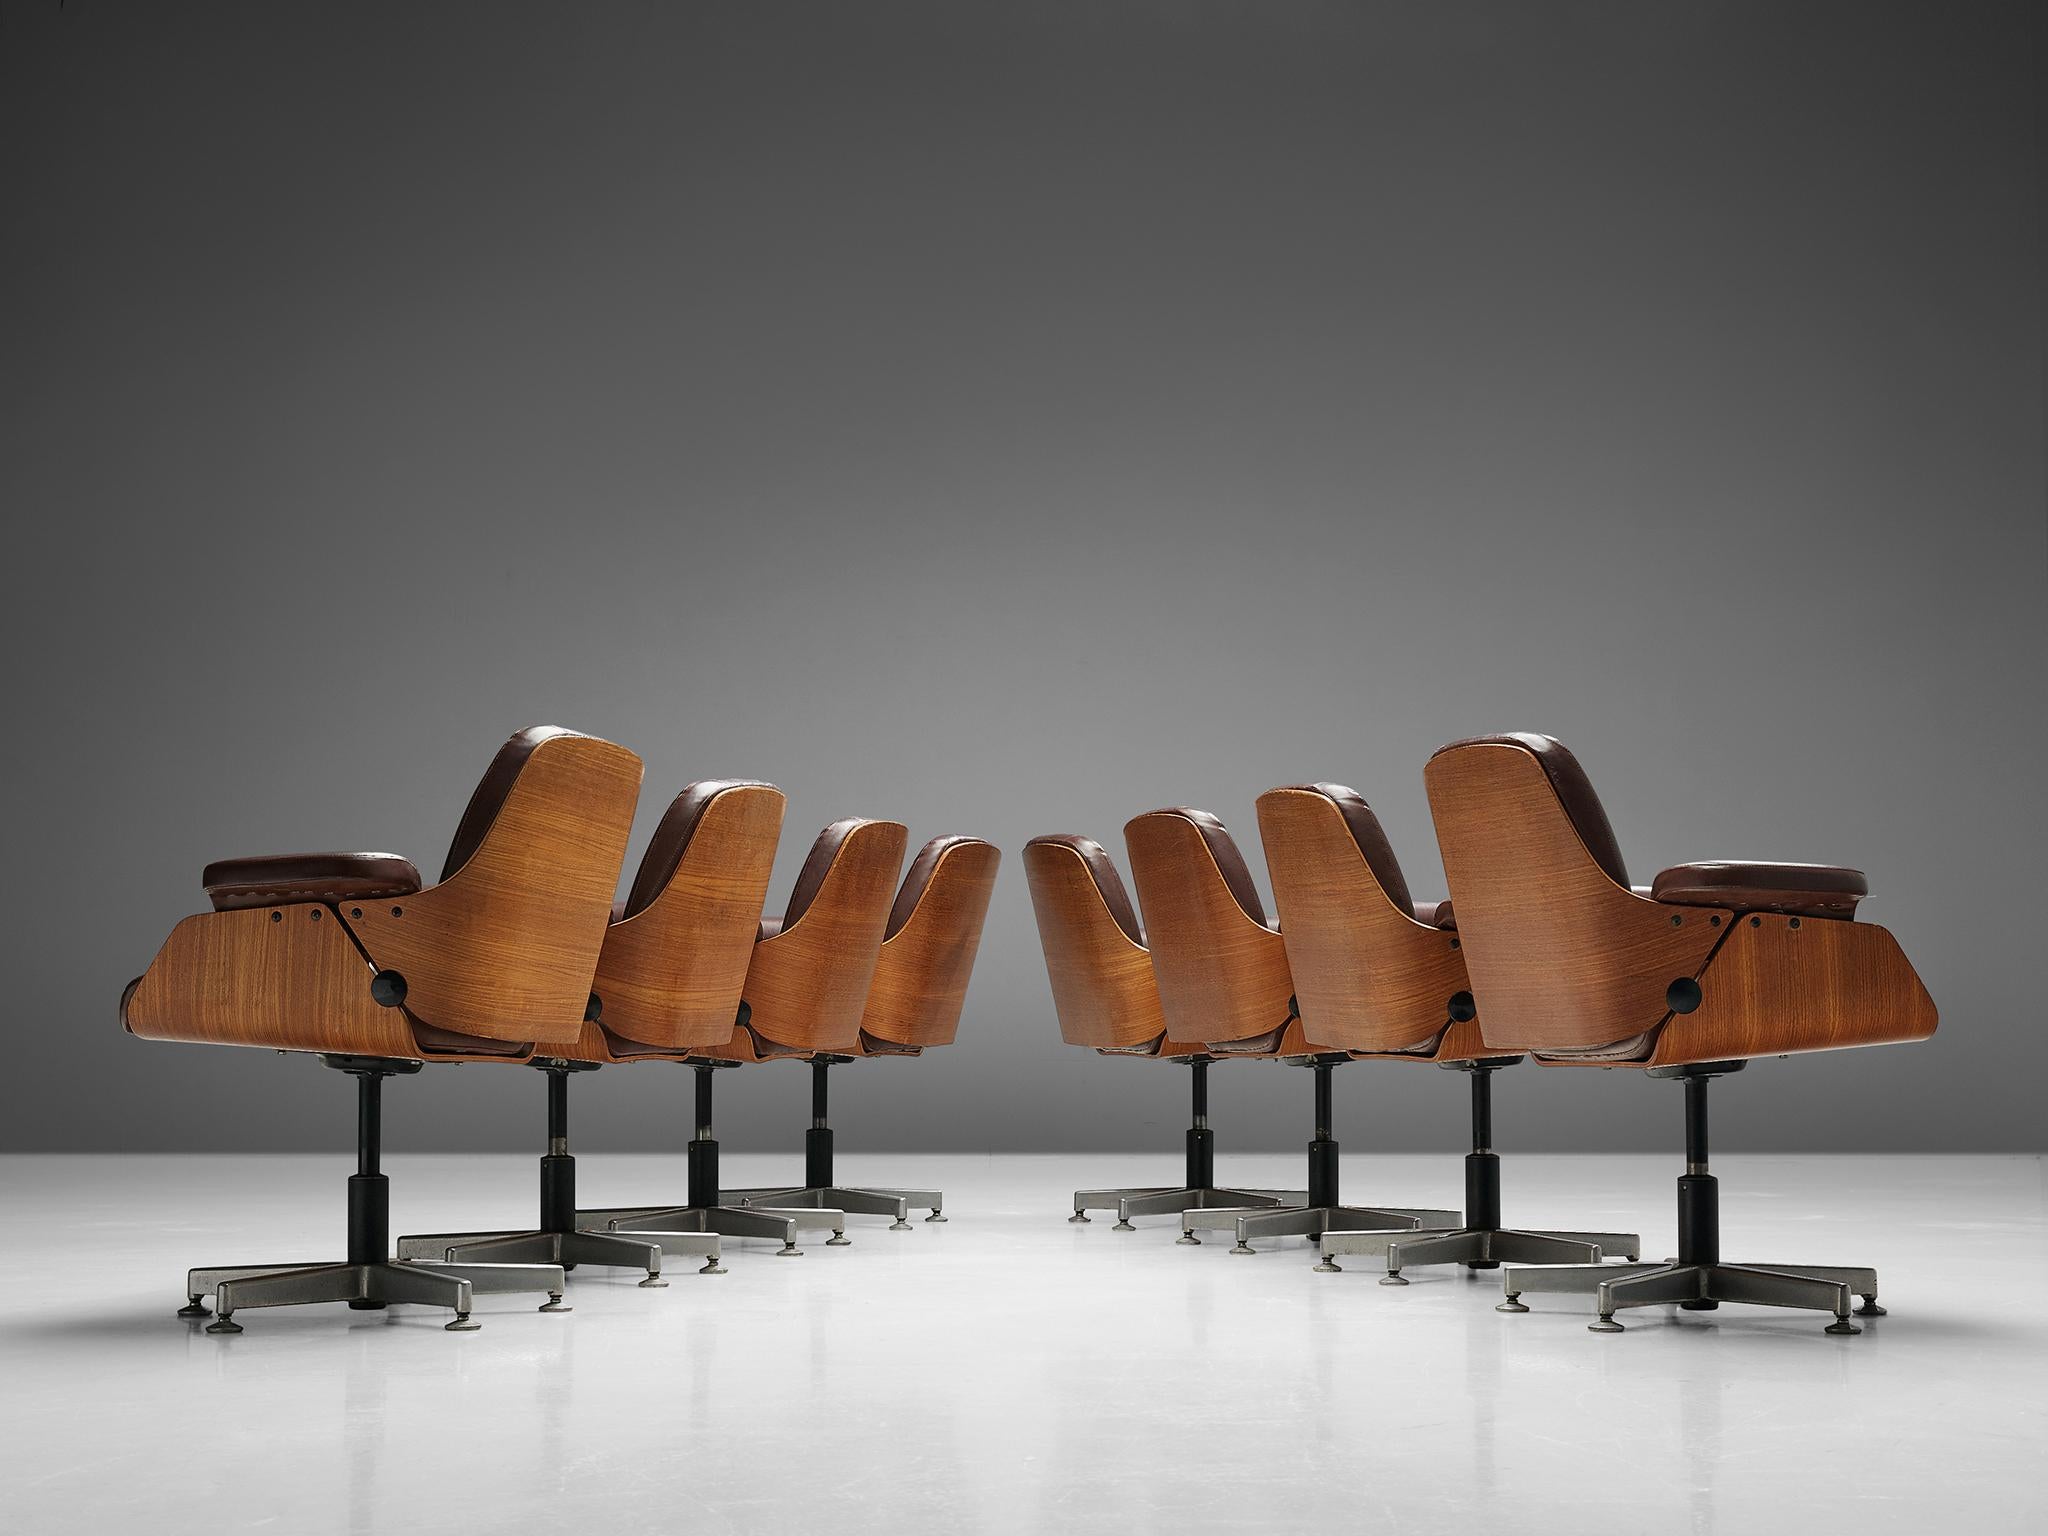 Carlo B. Fongaro for Dinamarquesa, set of eight conference chairs, teak, leather, metal, Brazil, 1975.

Set of eight office chairs designed by Carlo Fongaro and manufactured by Dinamarquesa, Brazil, 1975. These chairs have splendid wooden shell